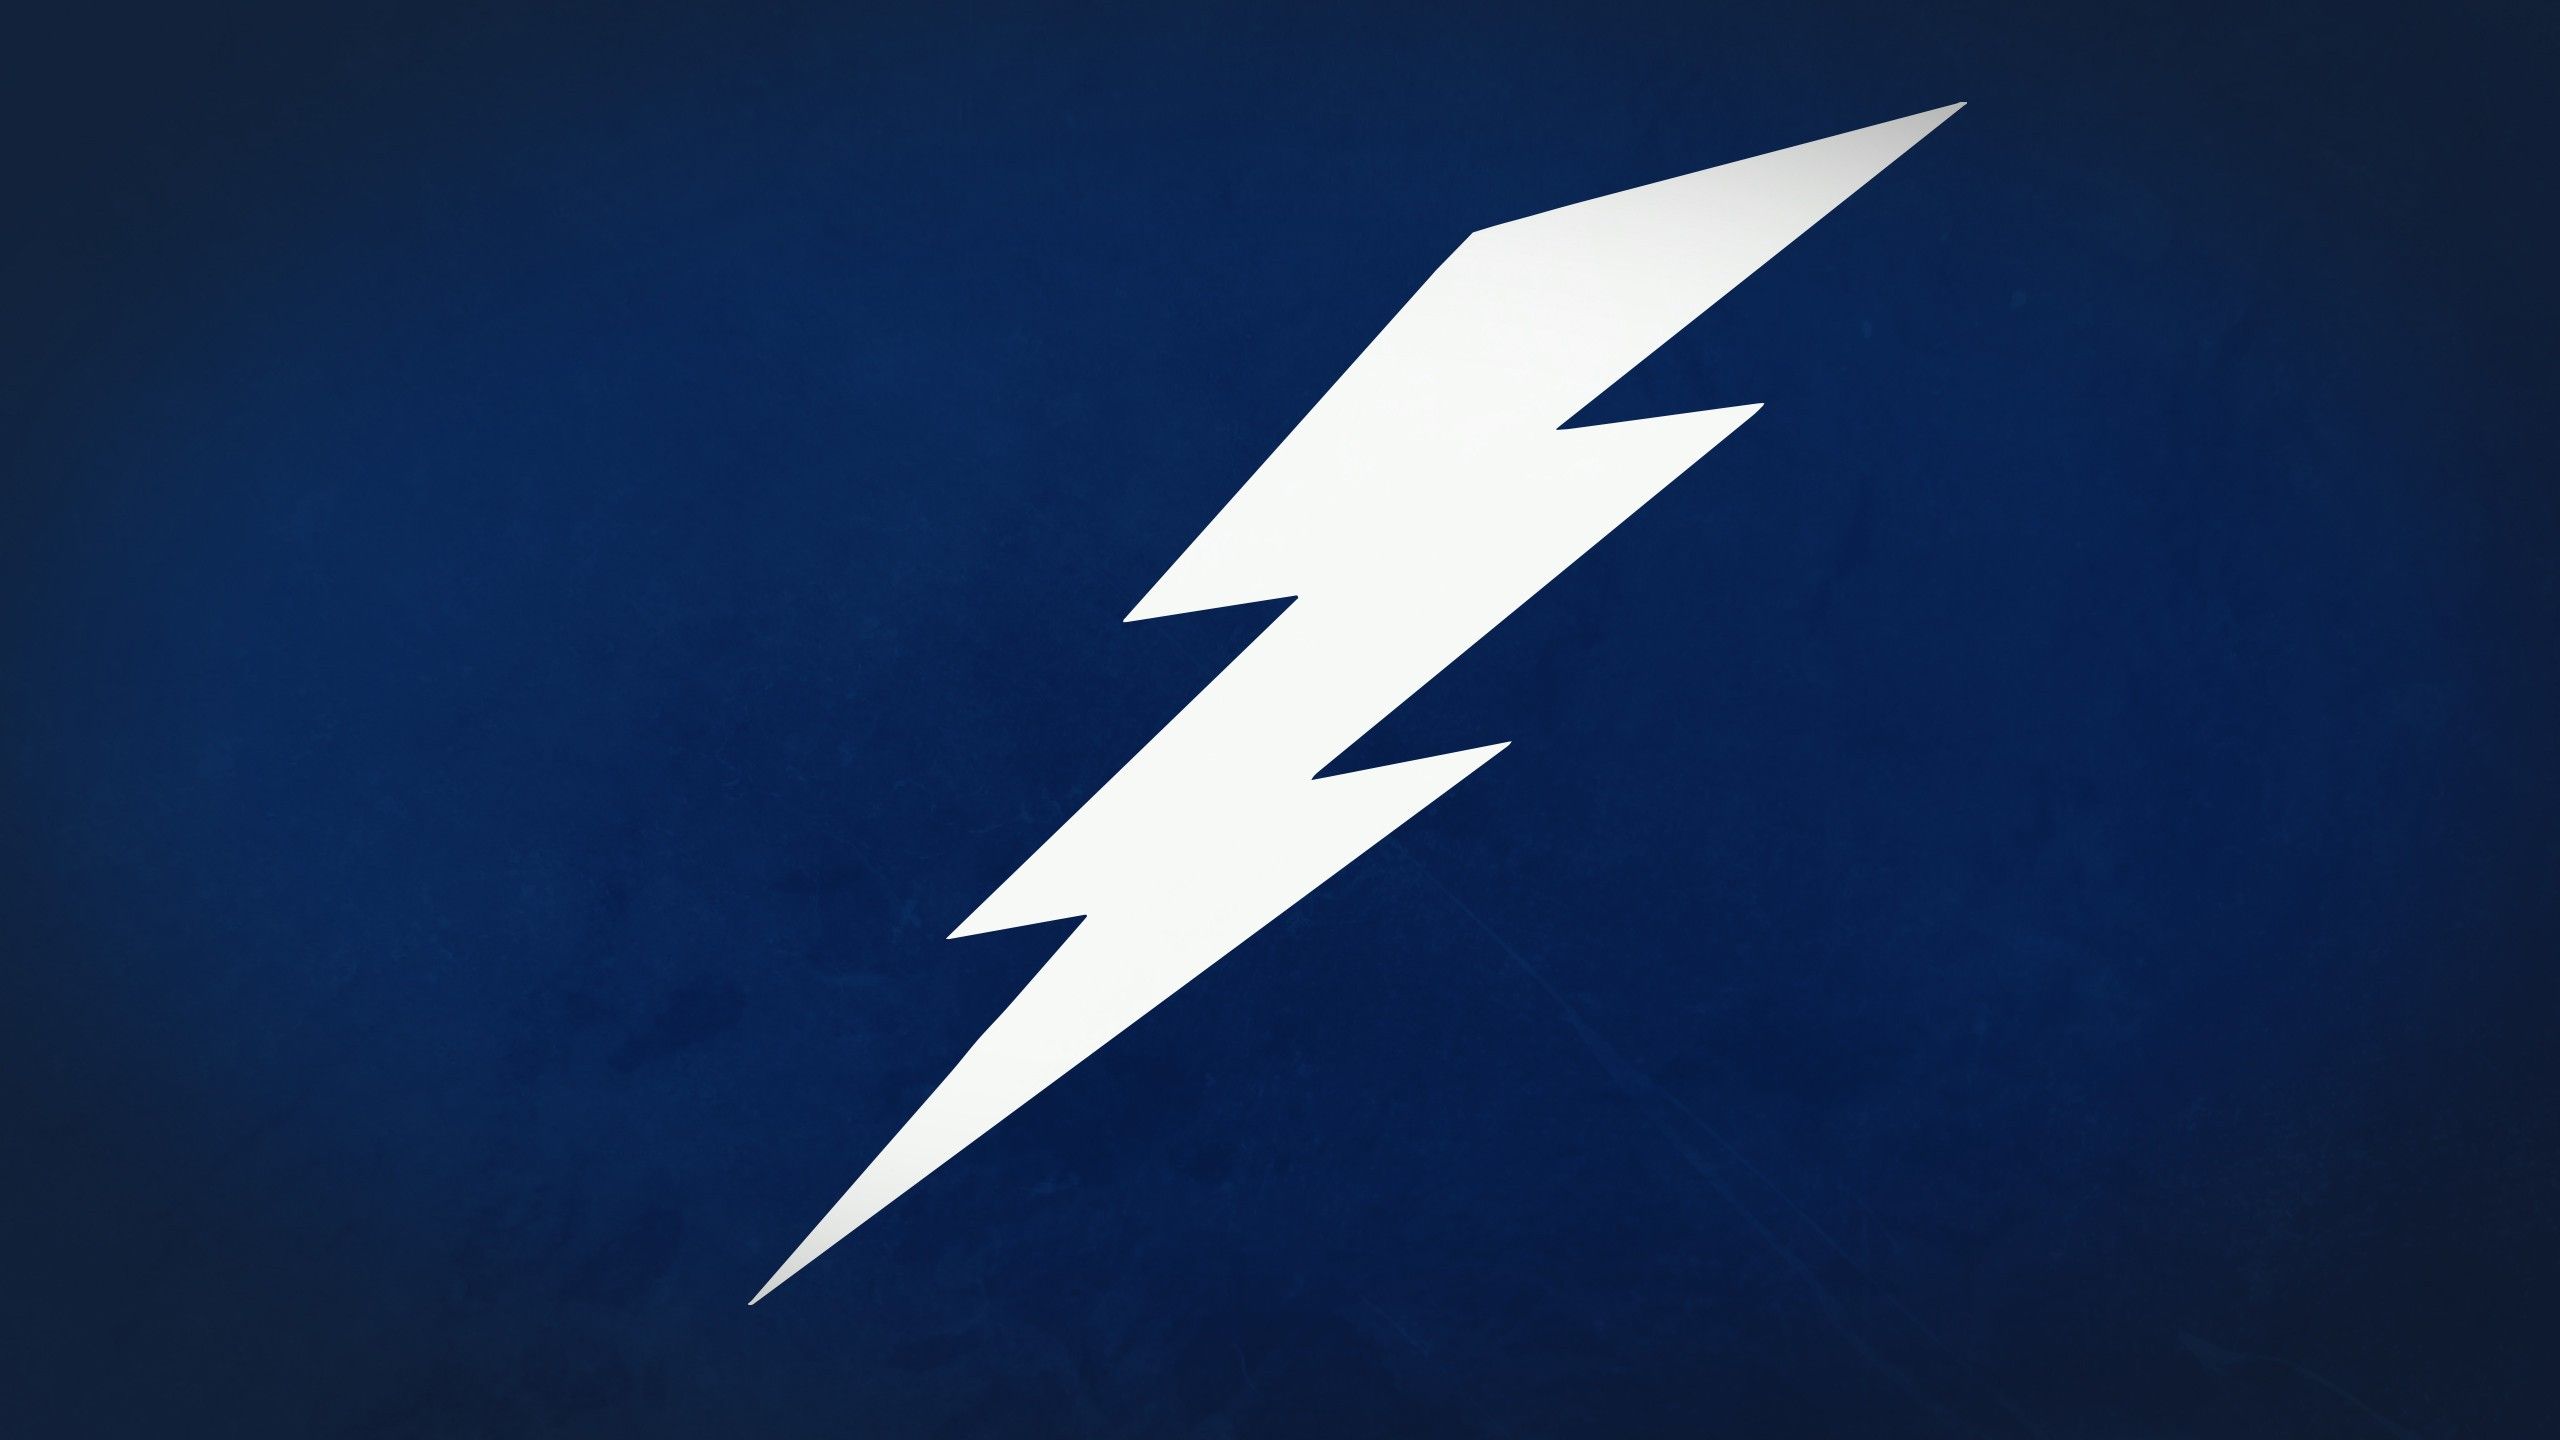 Tampa Bay Lightning wallpapers, Sports, HQ Tampa Bay Lightning pictures